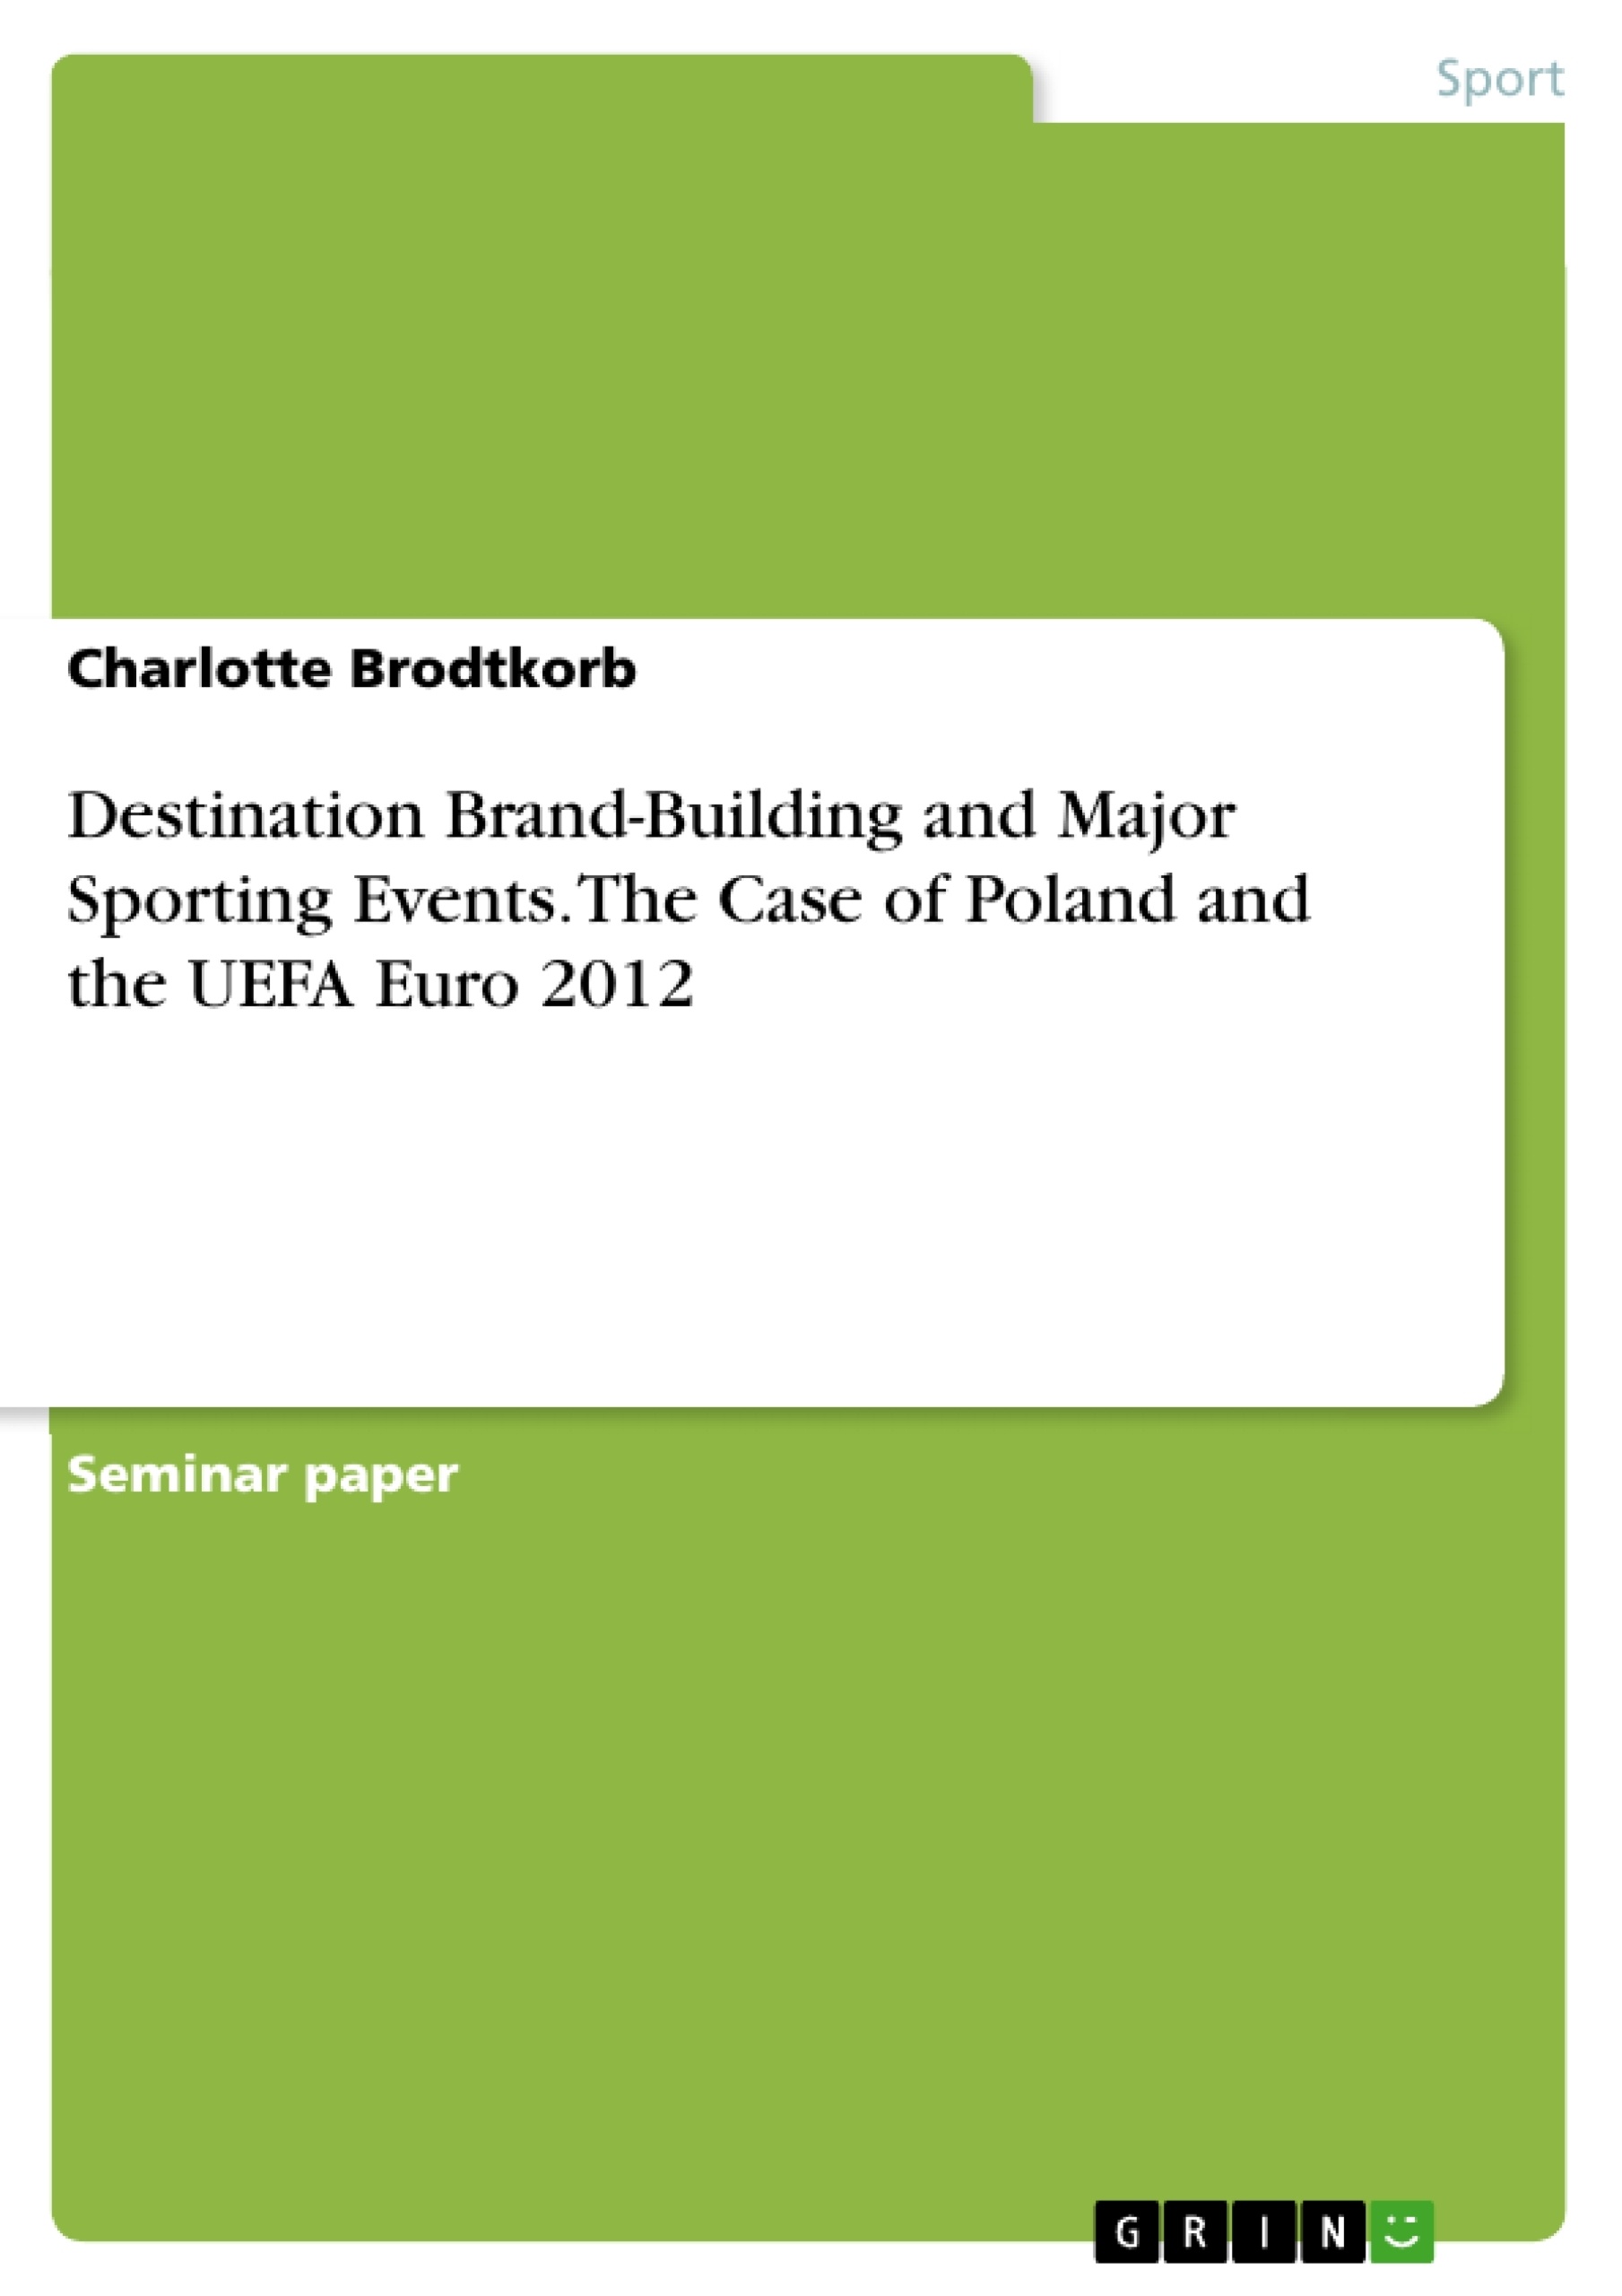 Title: Destination Brand-Building and Major Sporting Events. The Case of Poland and the UEFA Euro 2012